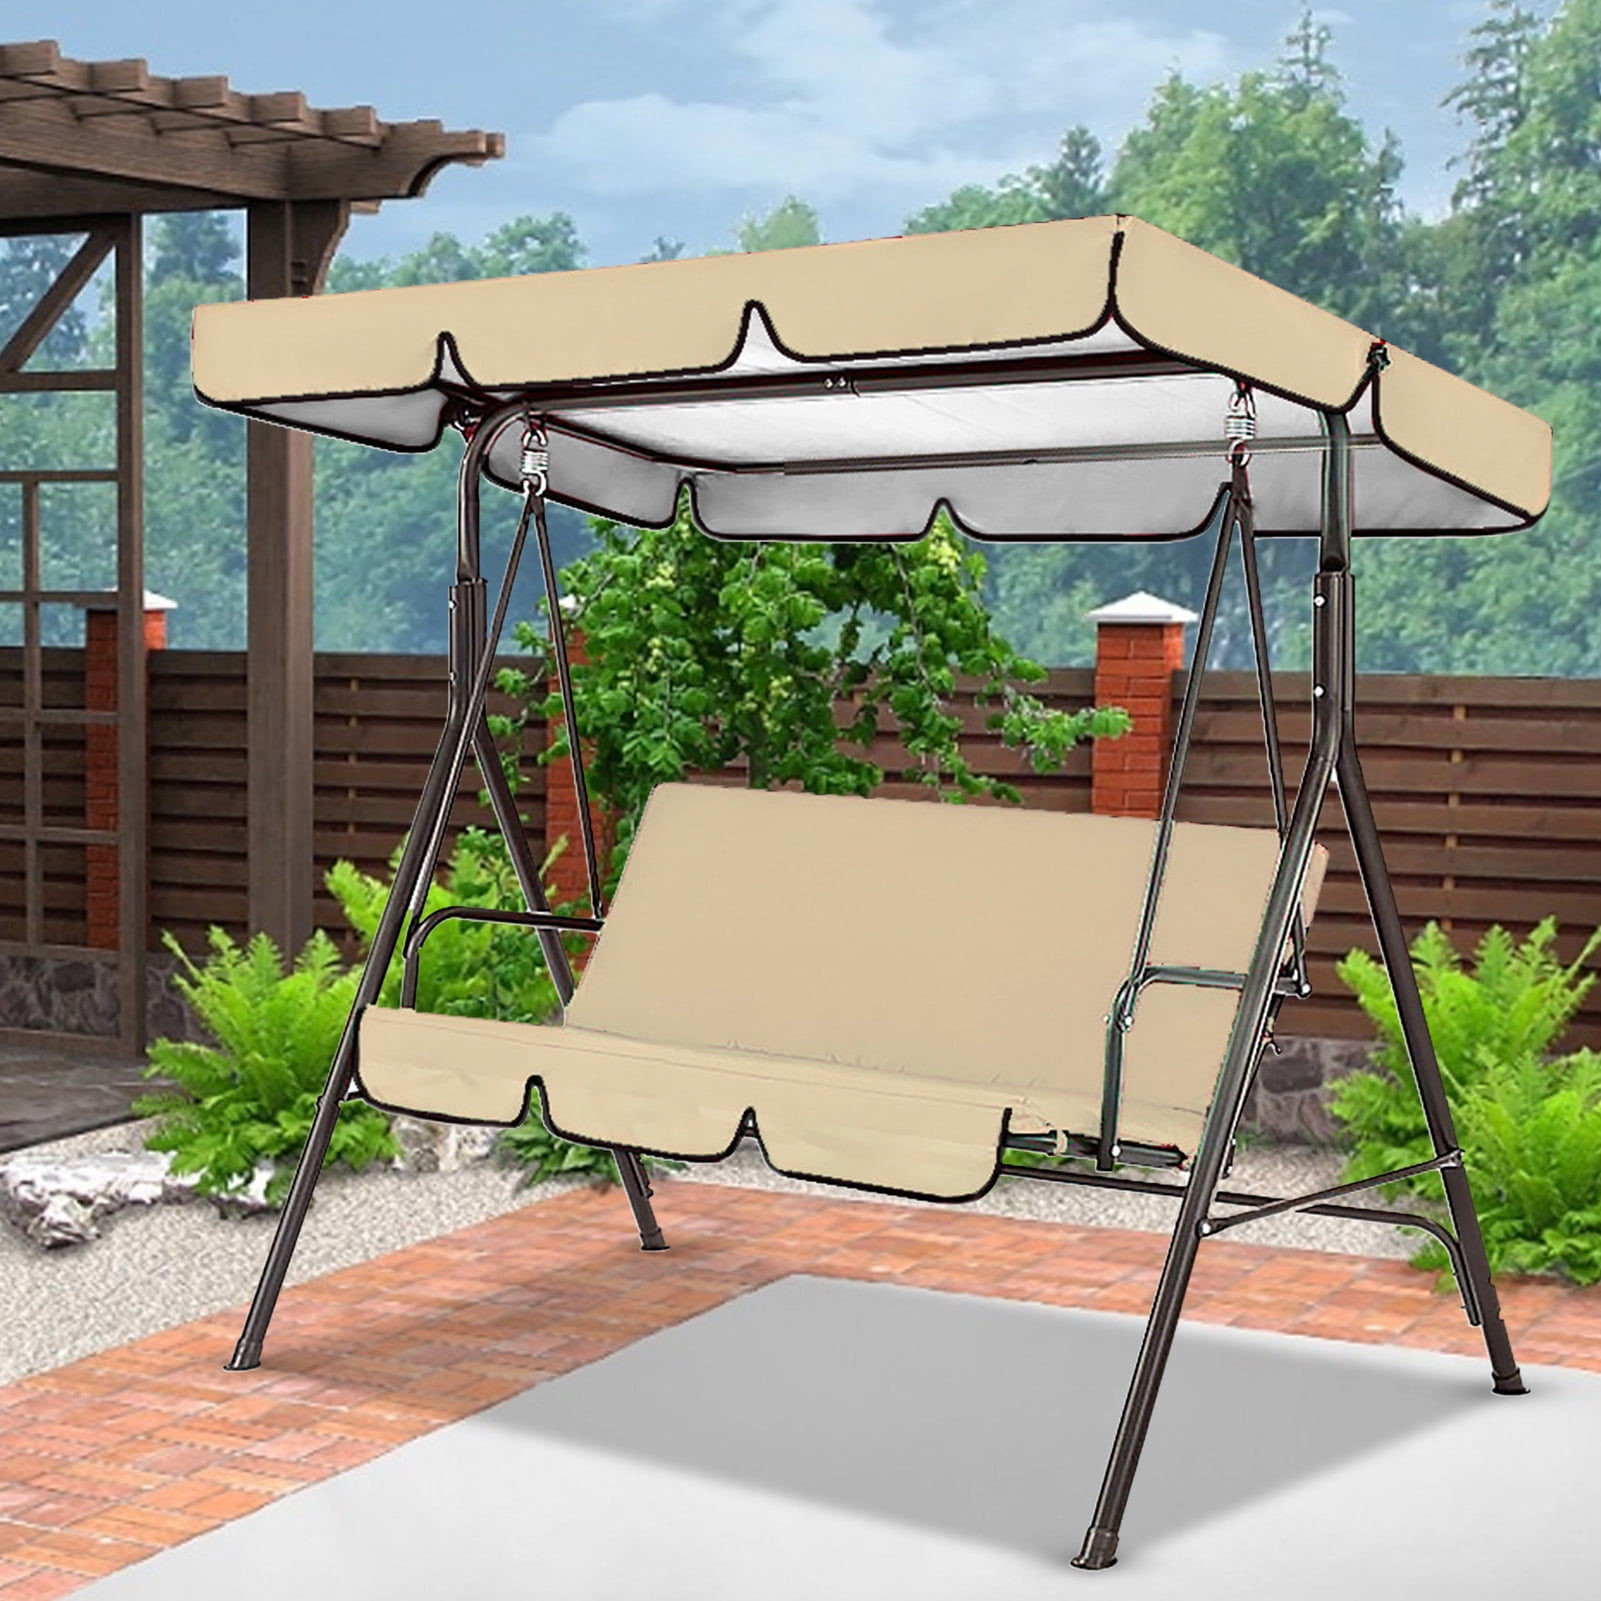 12x20ft Details about   Shatex 90% Sun Shade Panel for Outdoor Garden Canopy Wheat Color 